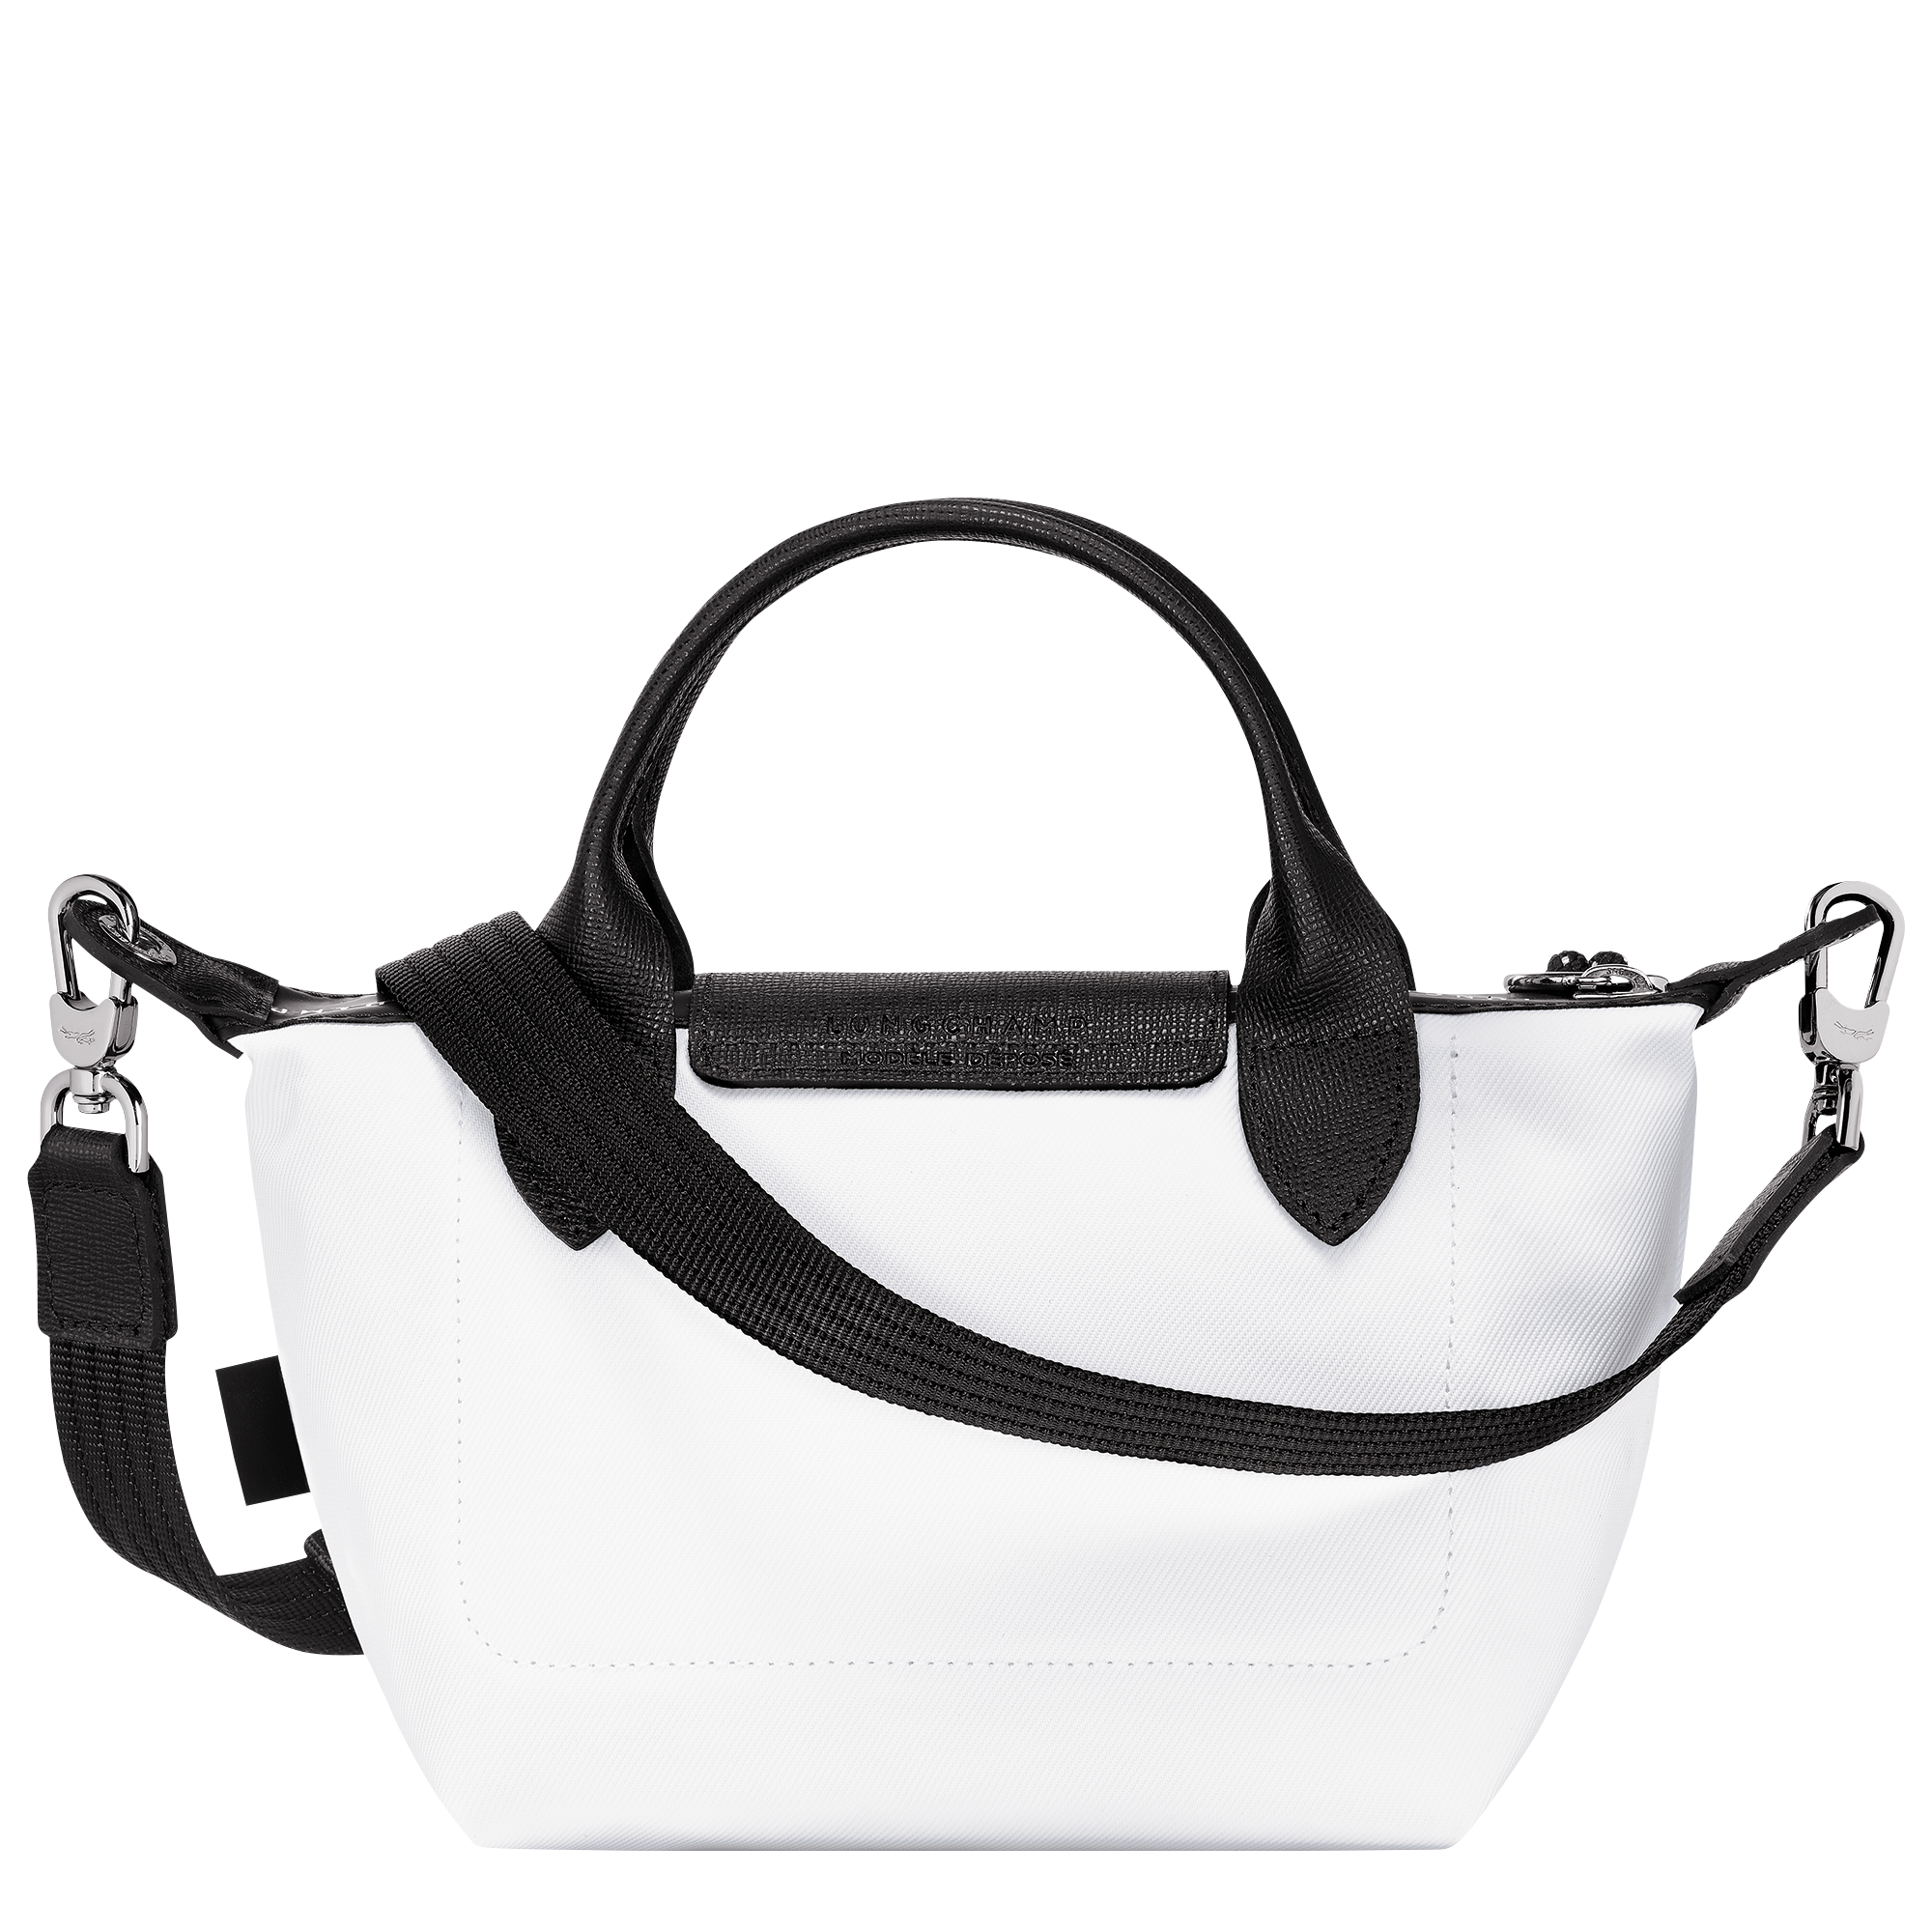 Le Pliage Energy Handtasche XS, Weiss